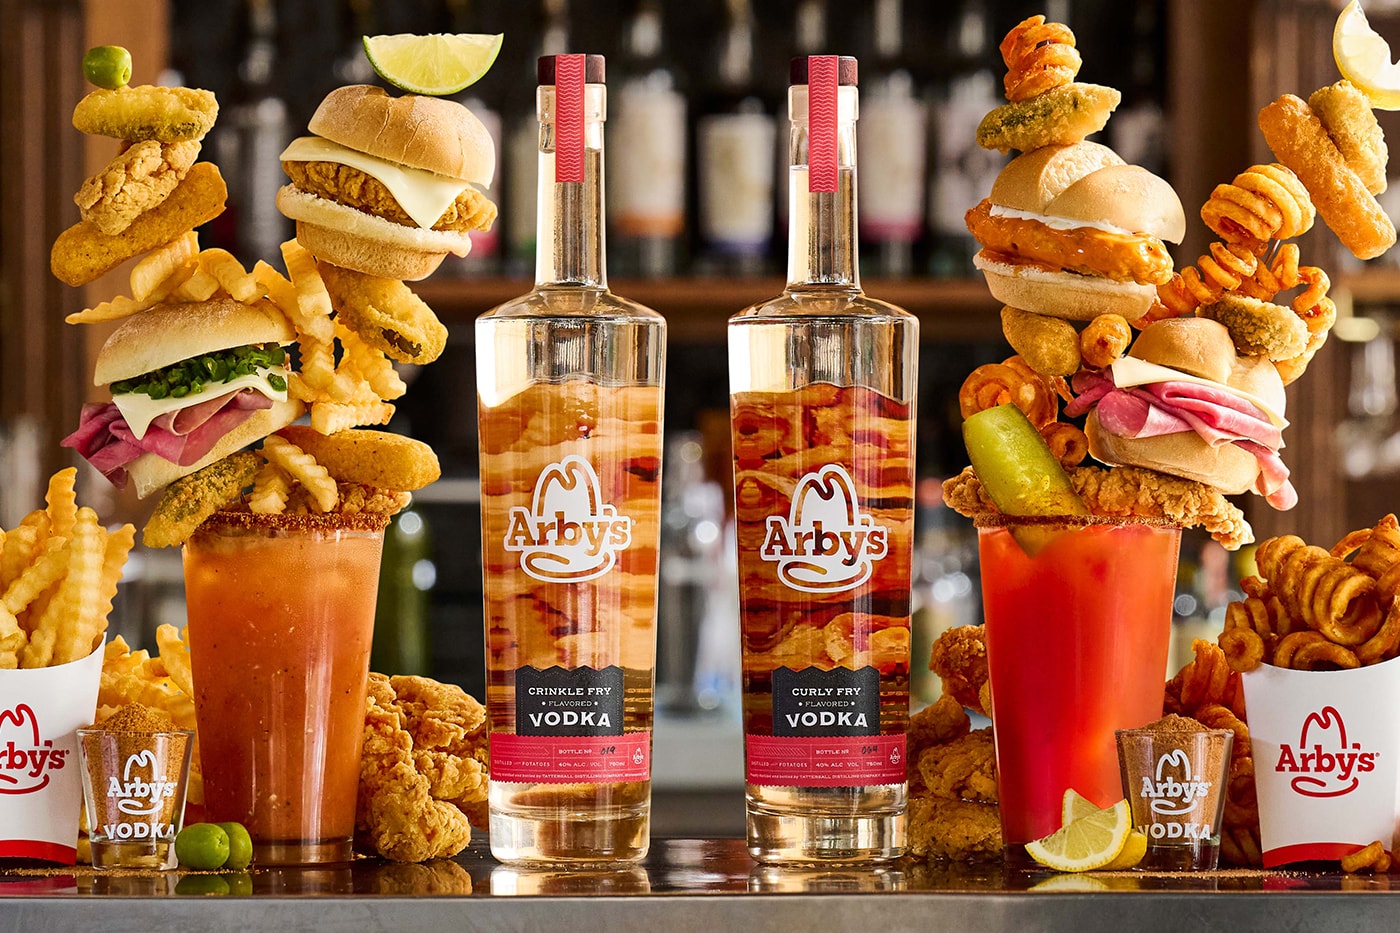 Arby's Limited-Edition Curly Fry Crinkle Fry Vodka Release